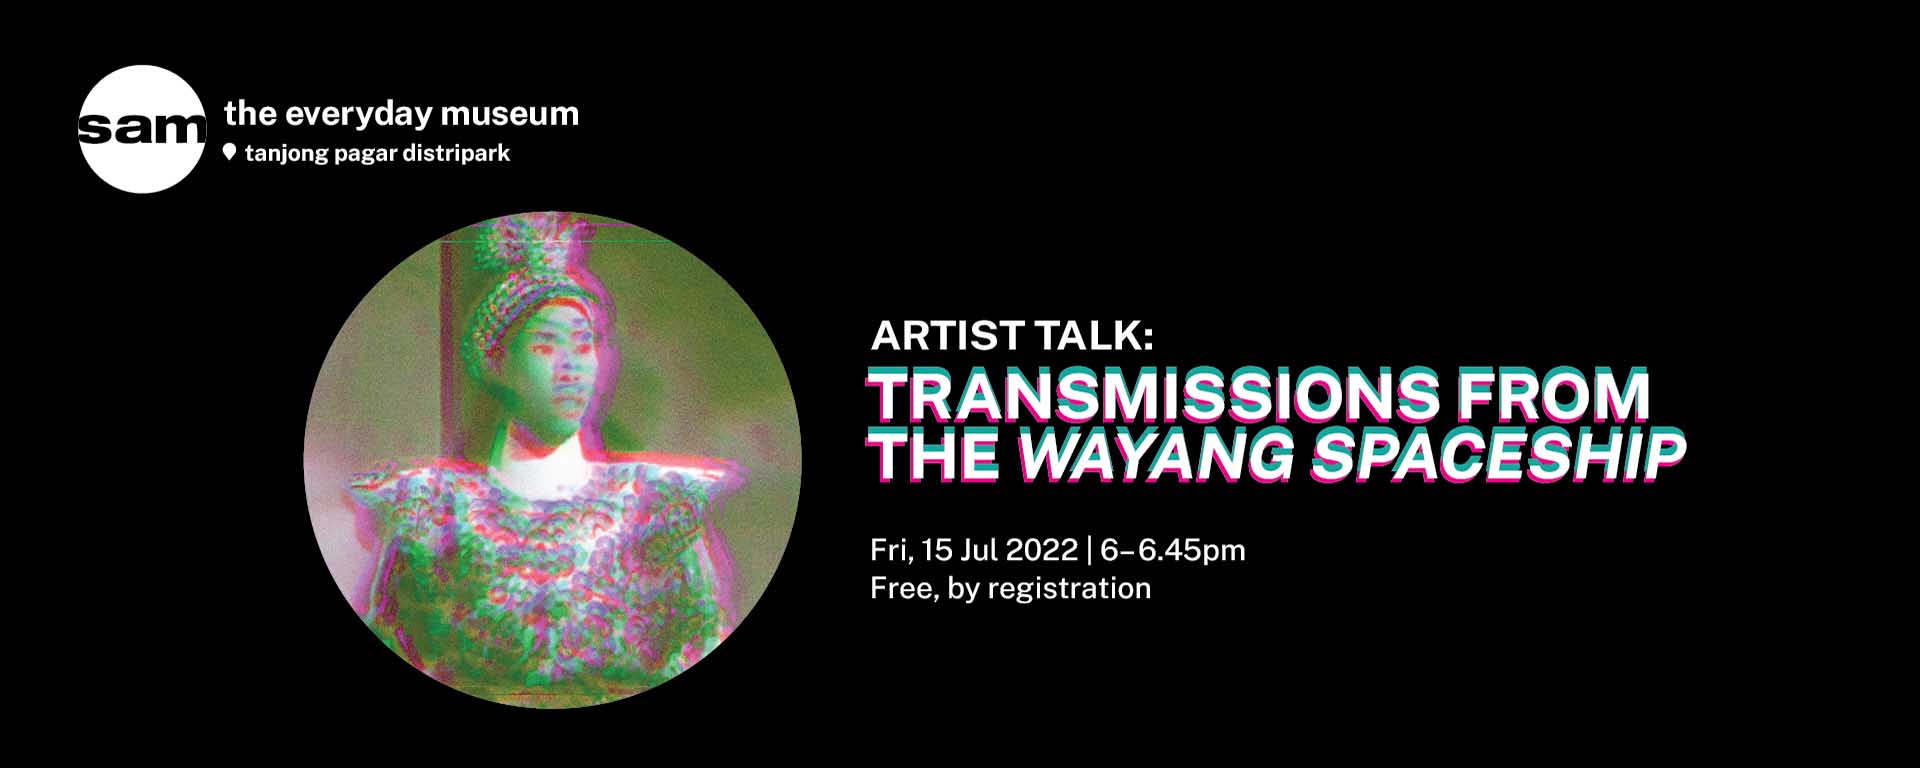 Artist Talk: Transmissions from the Wayang Spaceship